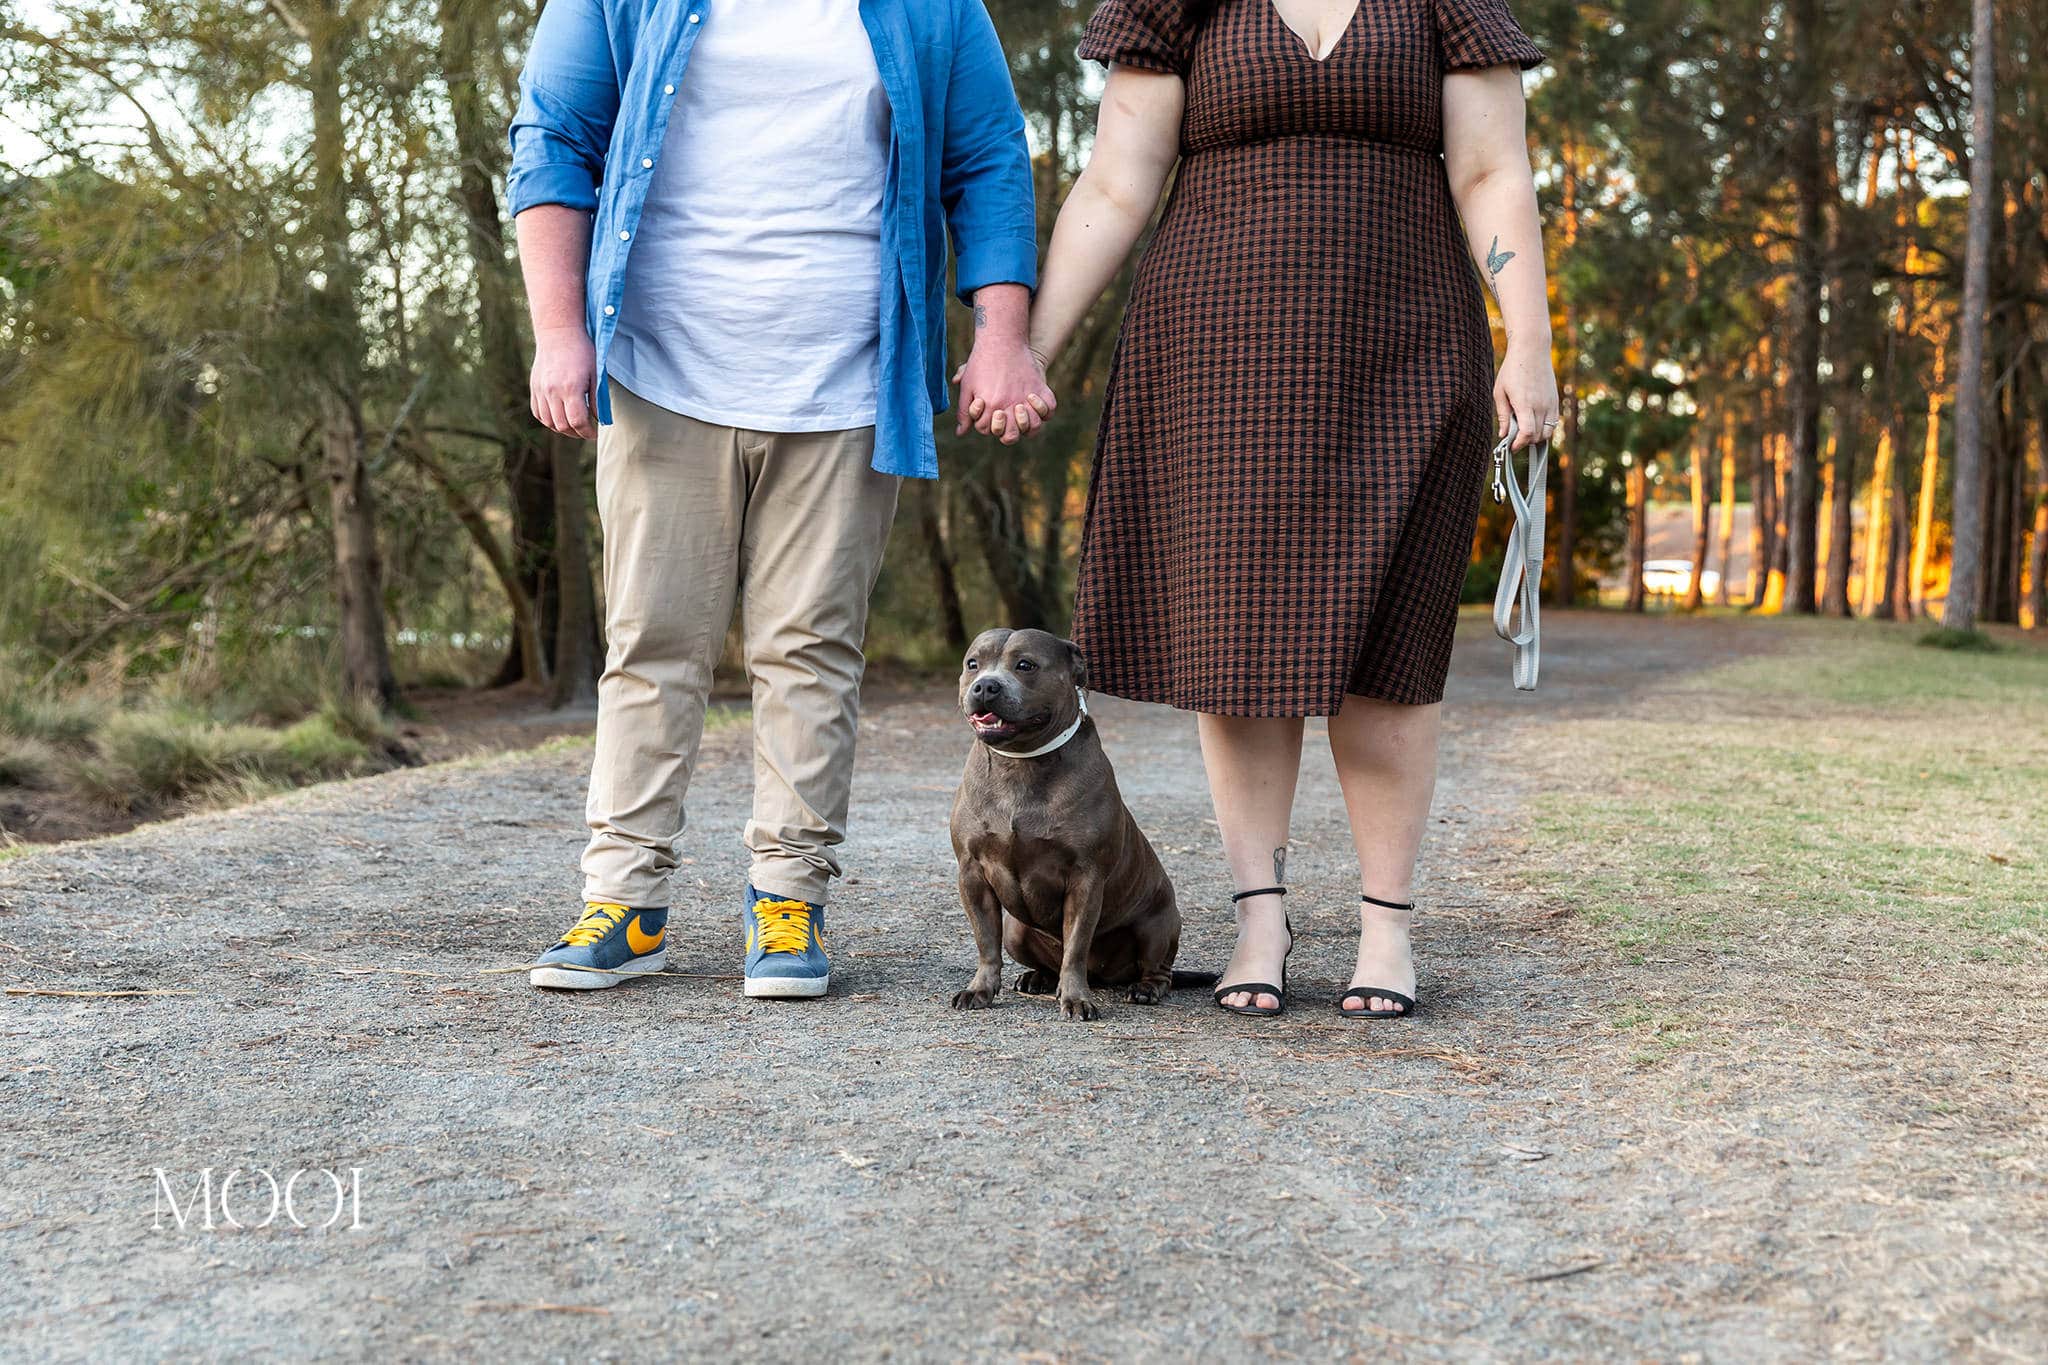 Engagement shoot at Pizzey Park with Tahlia and Peter and their fur baby.